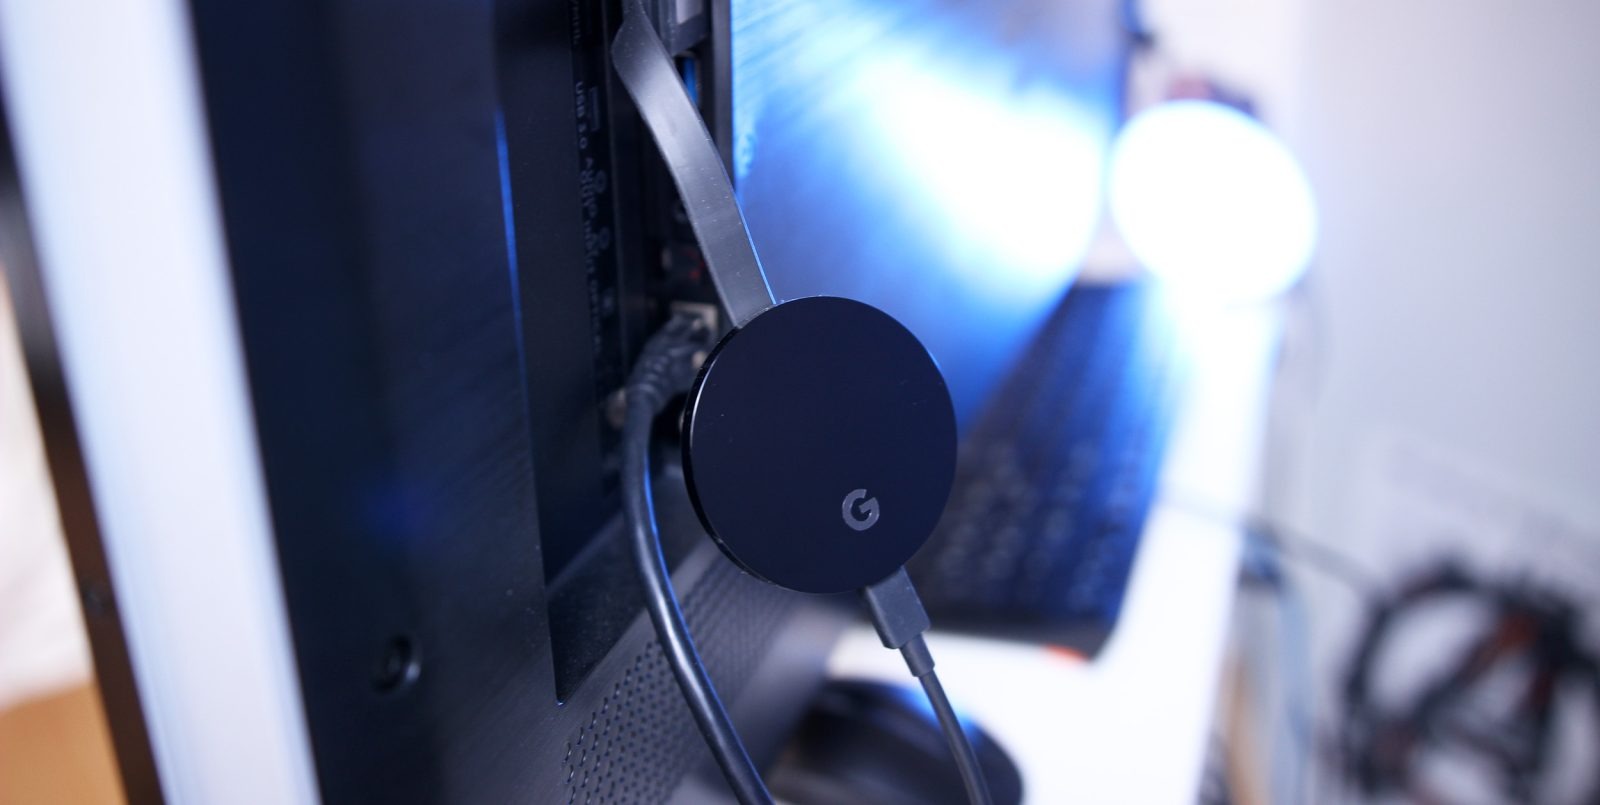 How To Connect Chromecast To A Mobile Hotspot